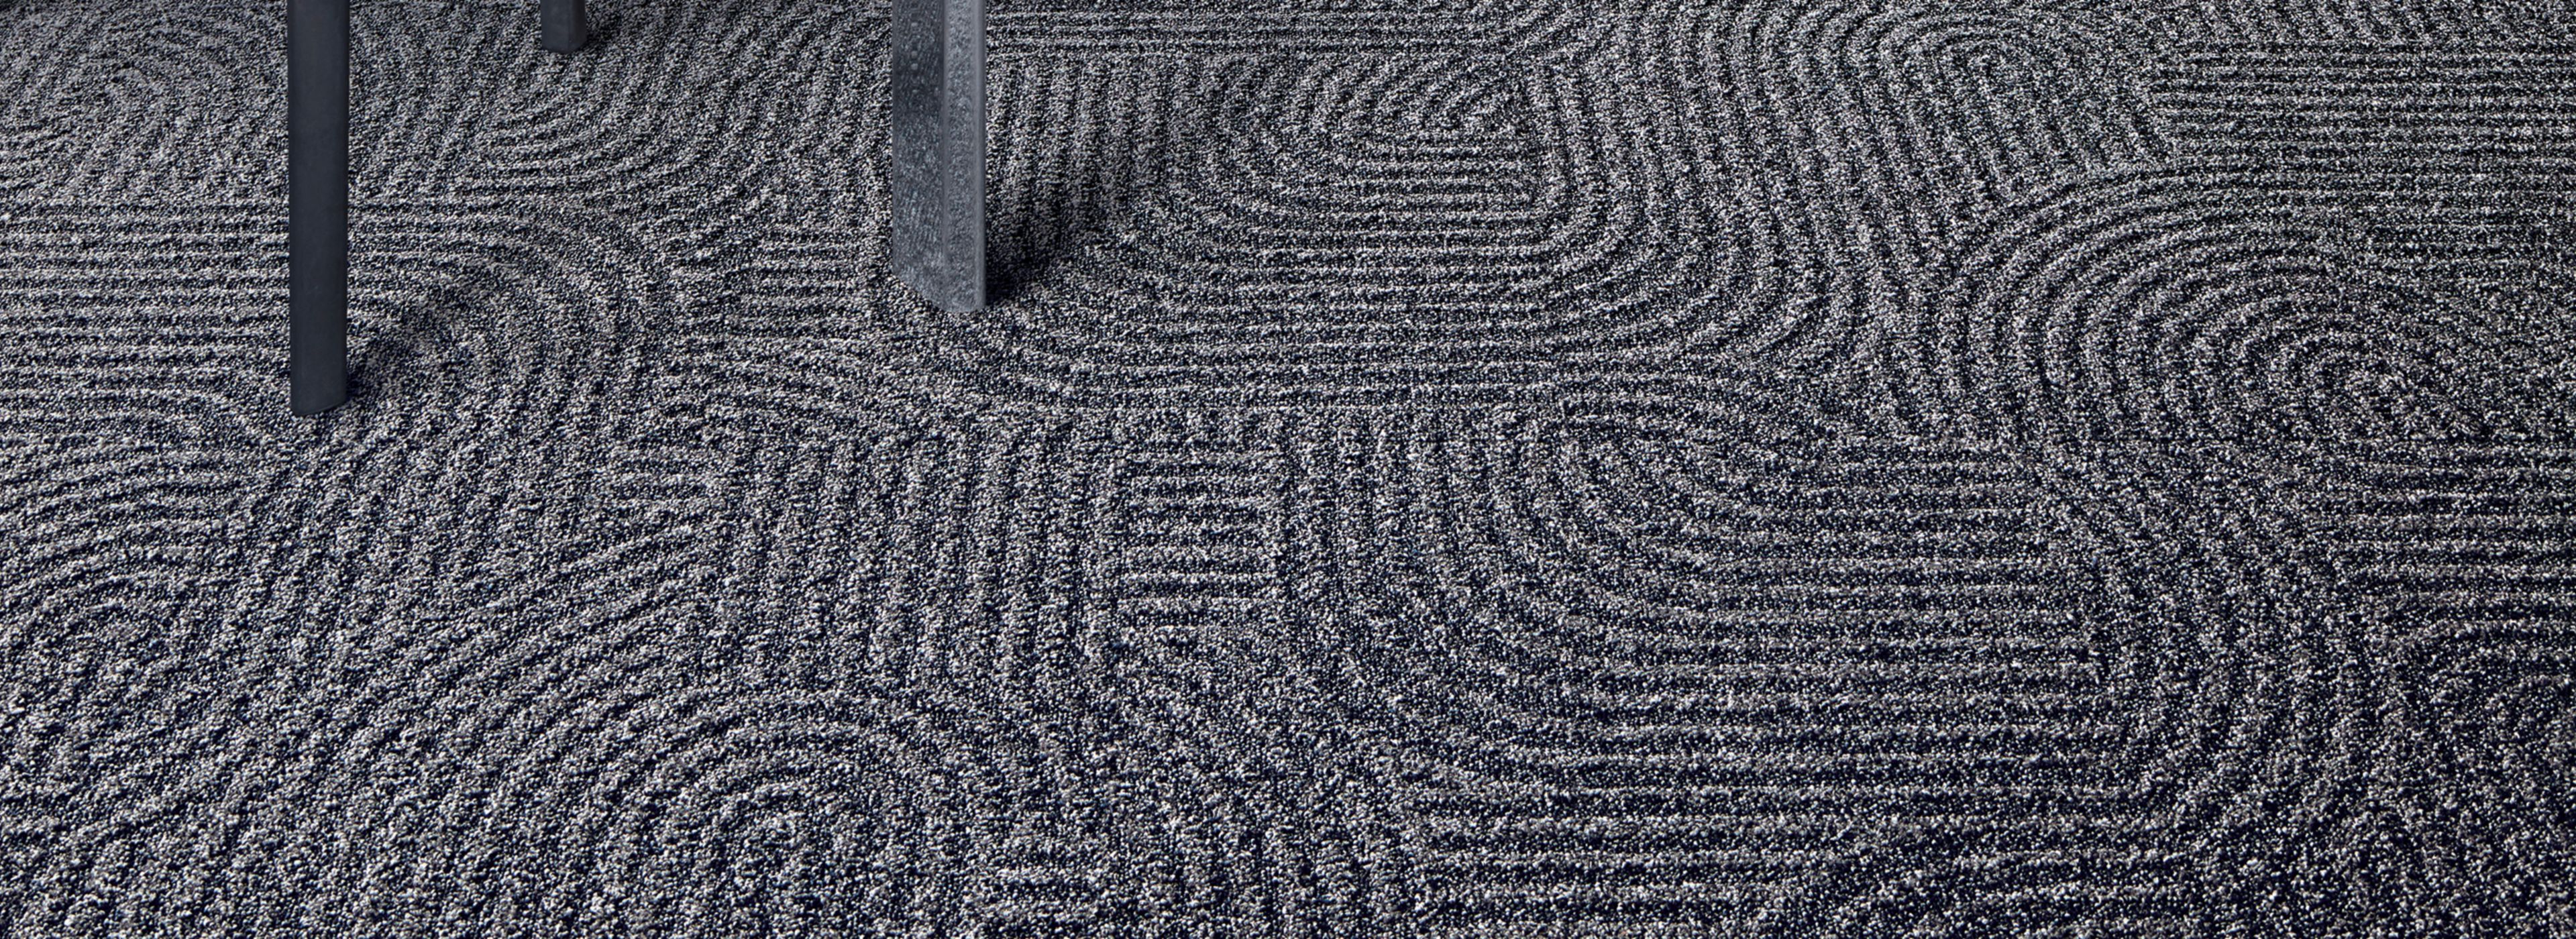 image Interface Step this Way carpet tile in office common area with tree numéro 1